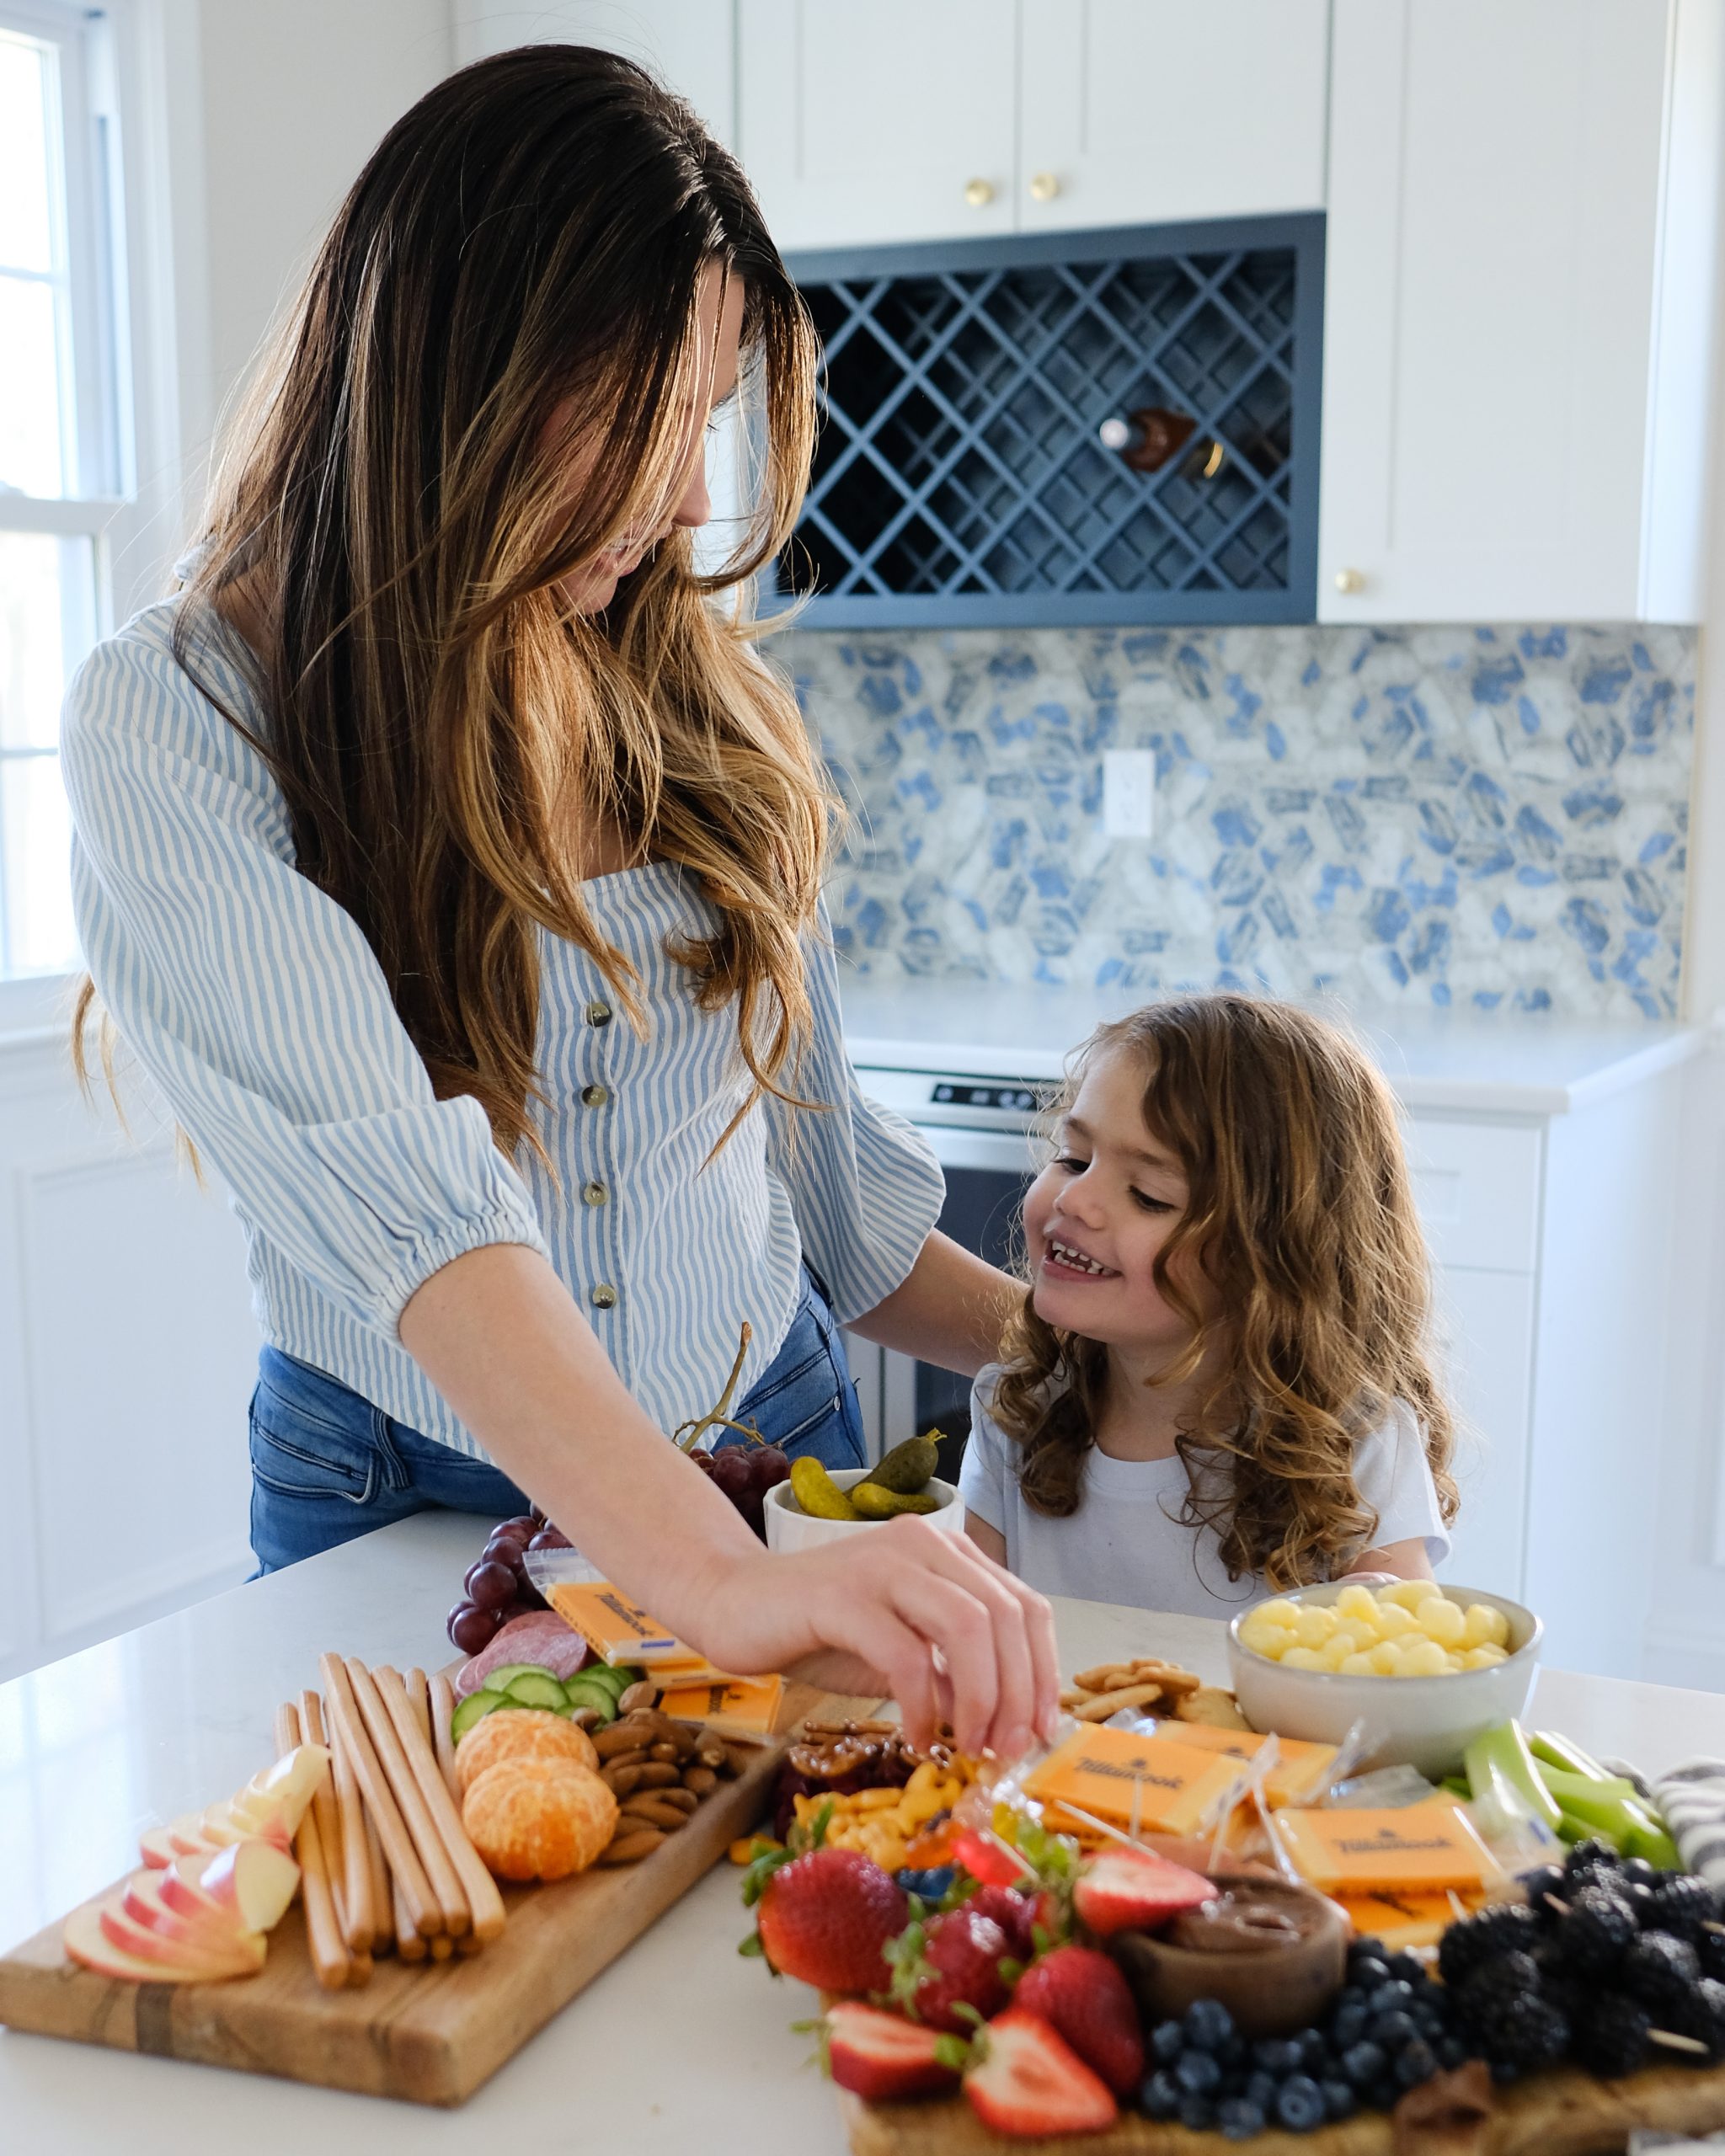 a woman and her daughter both with long brown hair eating from a snack board